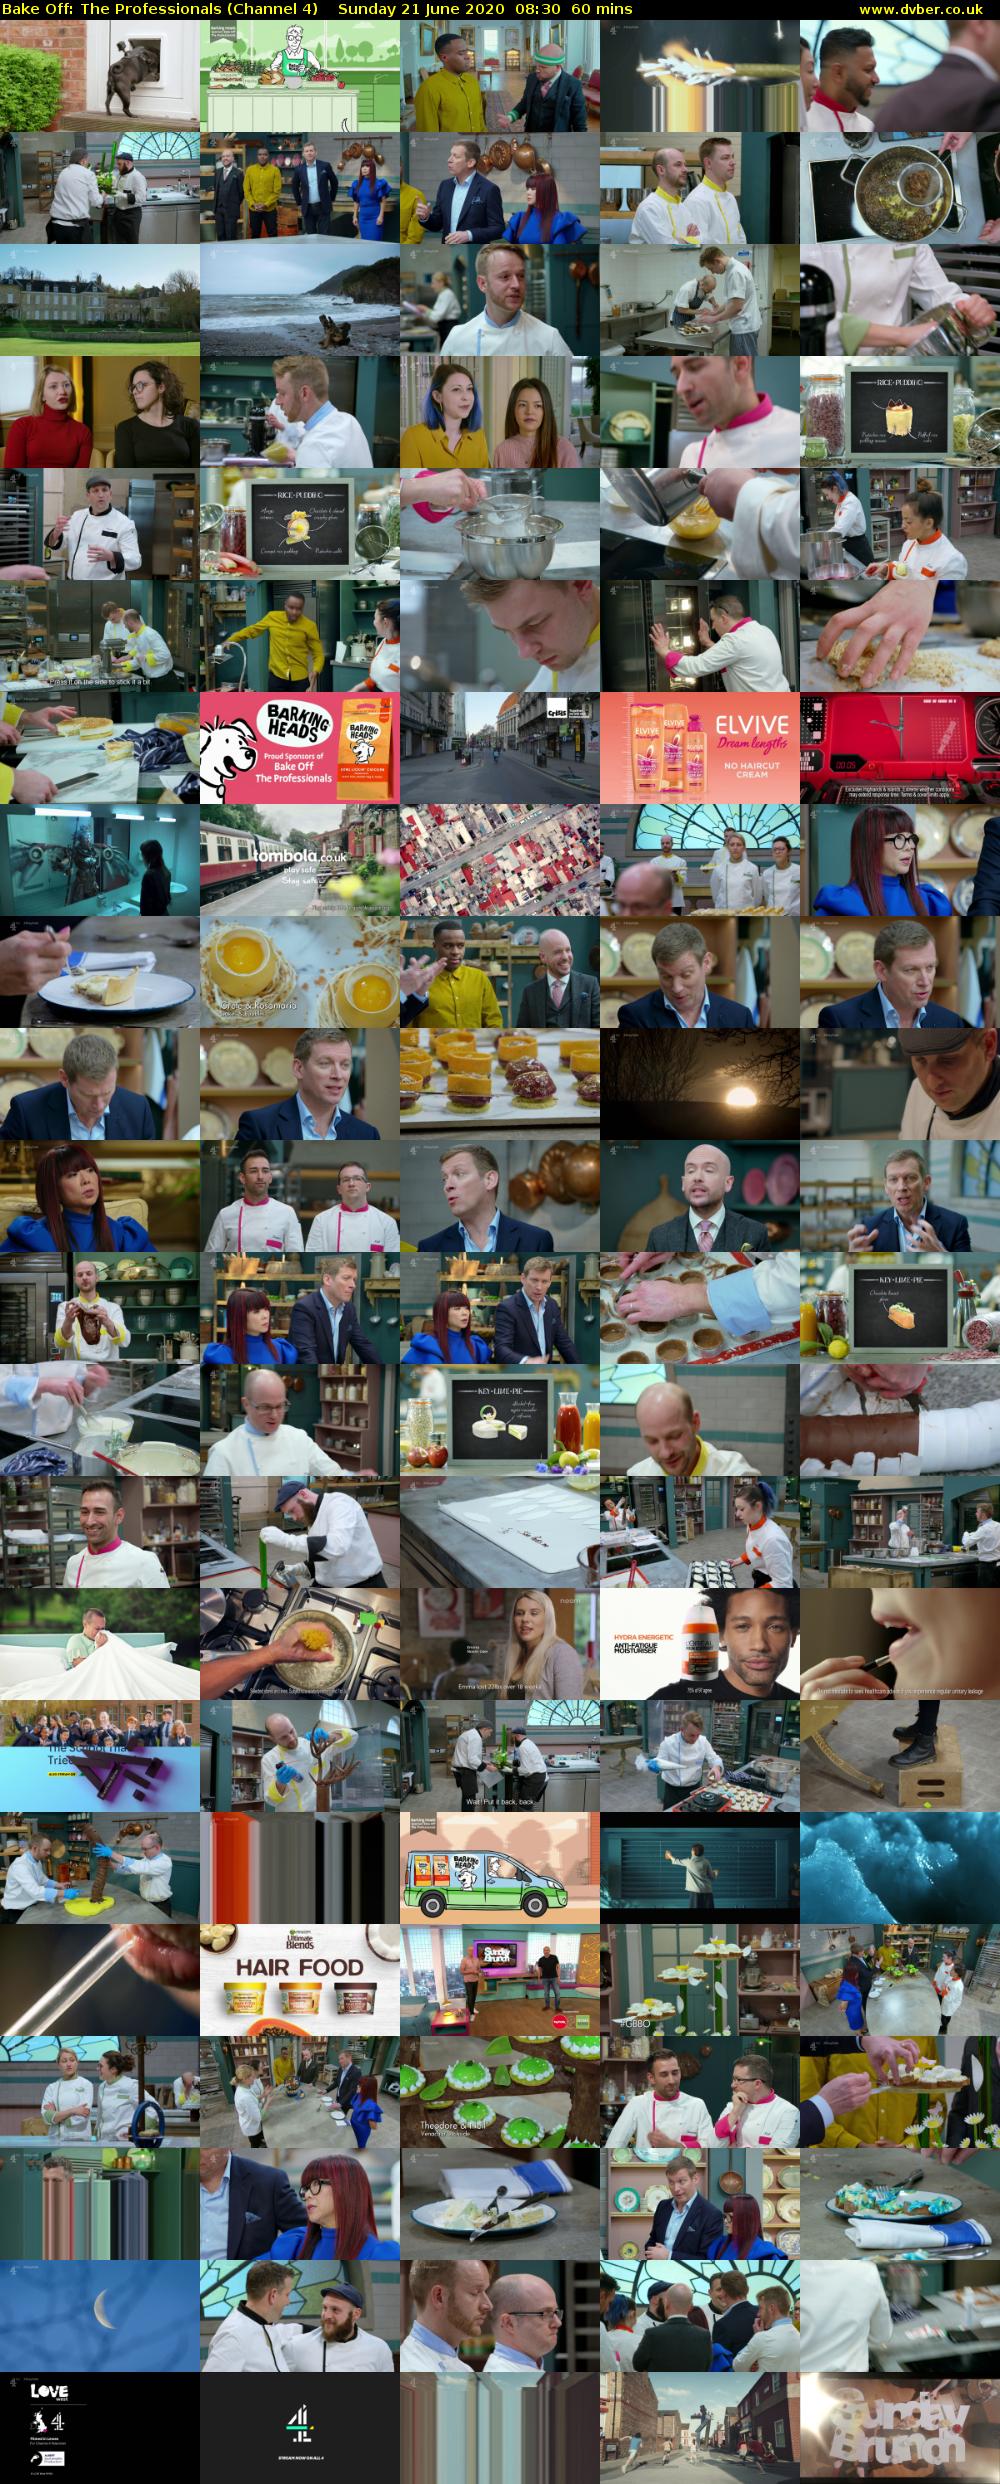 Bake Off: The Professionals (Channel 4) Sunday 21 June 2020 08:30 - 09:30